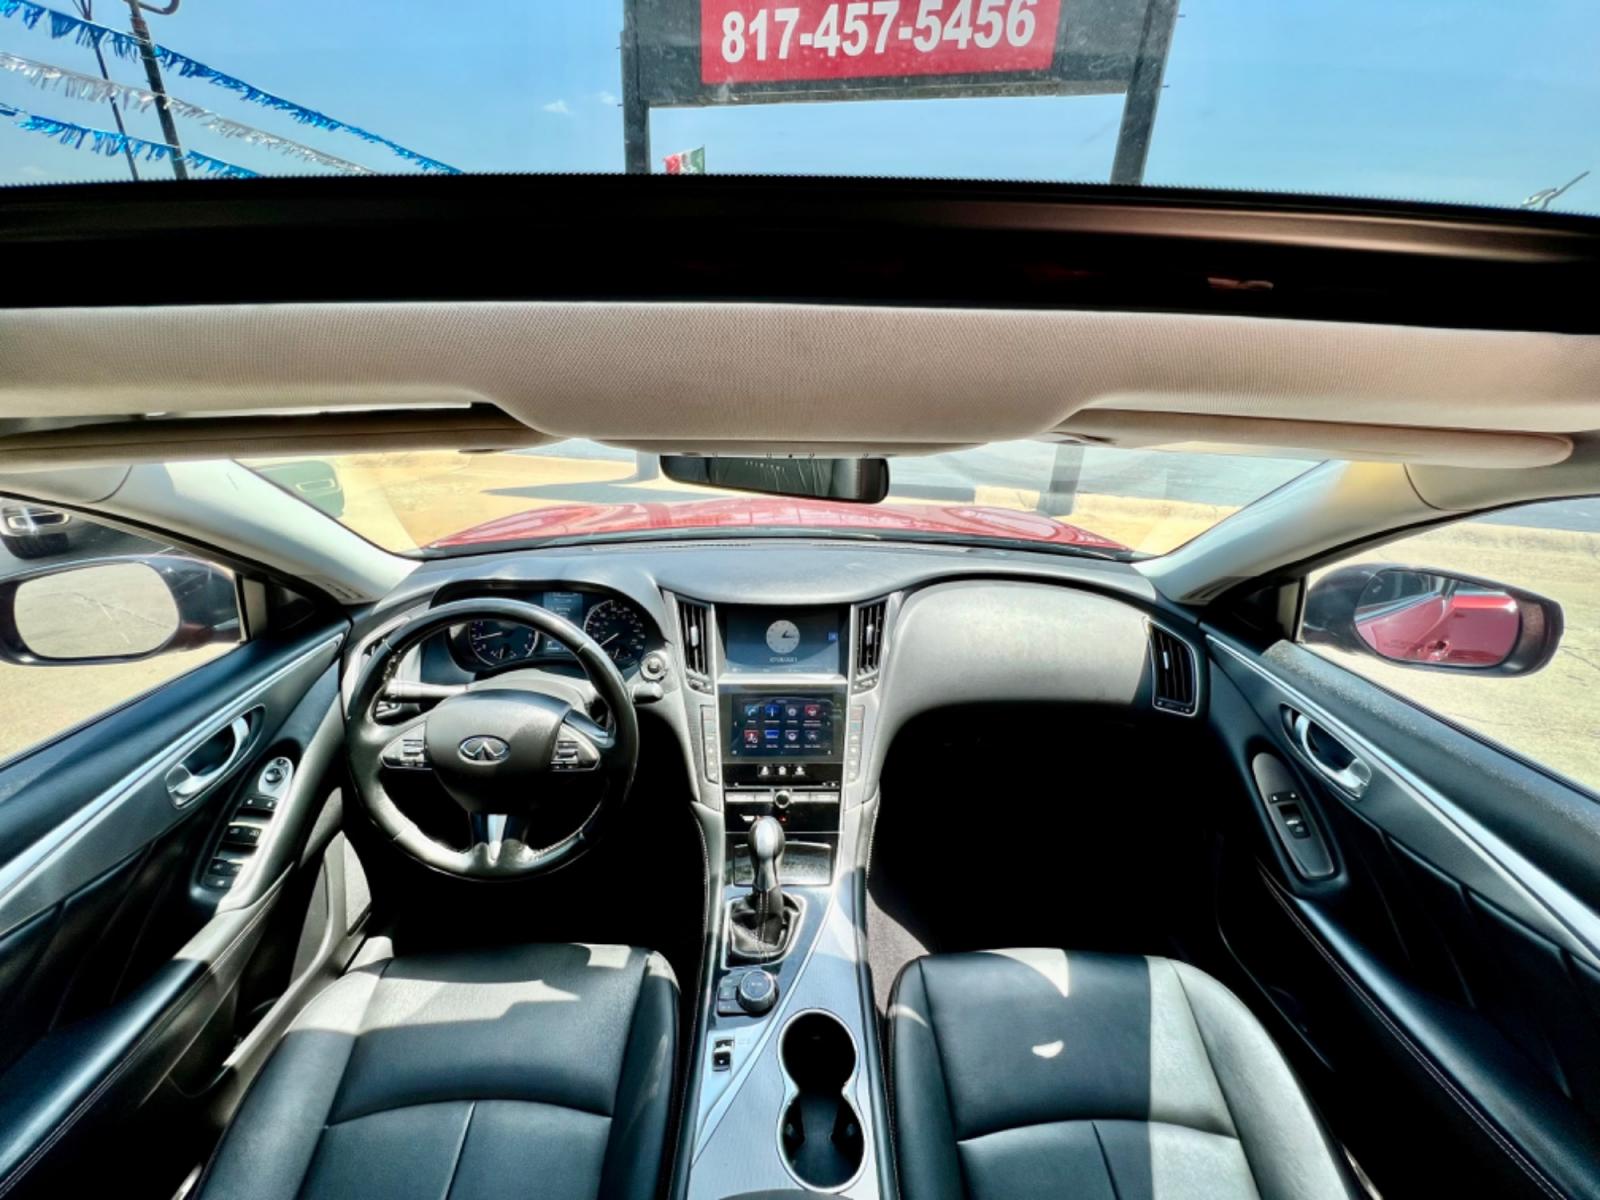 2014 RED INFINITI Q50 (JN1BV7AP9EM) , located at 5900 E. Lancaster Ave., Fort Worth, TX, 76112, (817) 457-5456, 0.000000, 0.000000 - This is a 2014 INFINITI Q50 4 DOOR SEDAN that is in excellent condition. There are no dents or scratches. The interior is clean with no rips or tears or stains. All power windows, door locks and seats. Ice cold AC for those hot Texas summer days. It is equipped with a CD player, AM/FM radio, AUX por - Photo #17